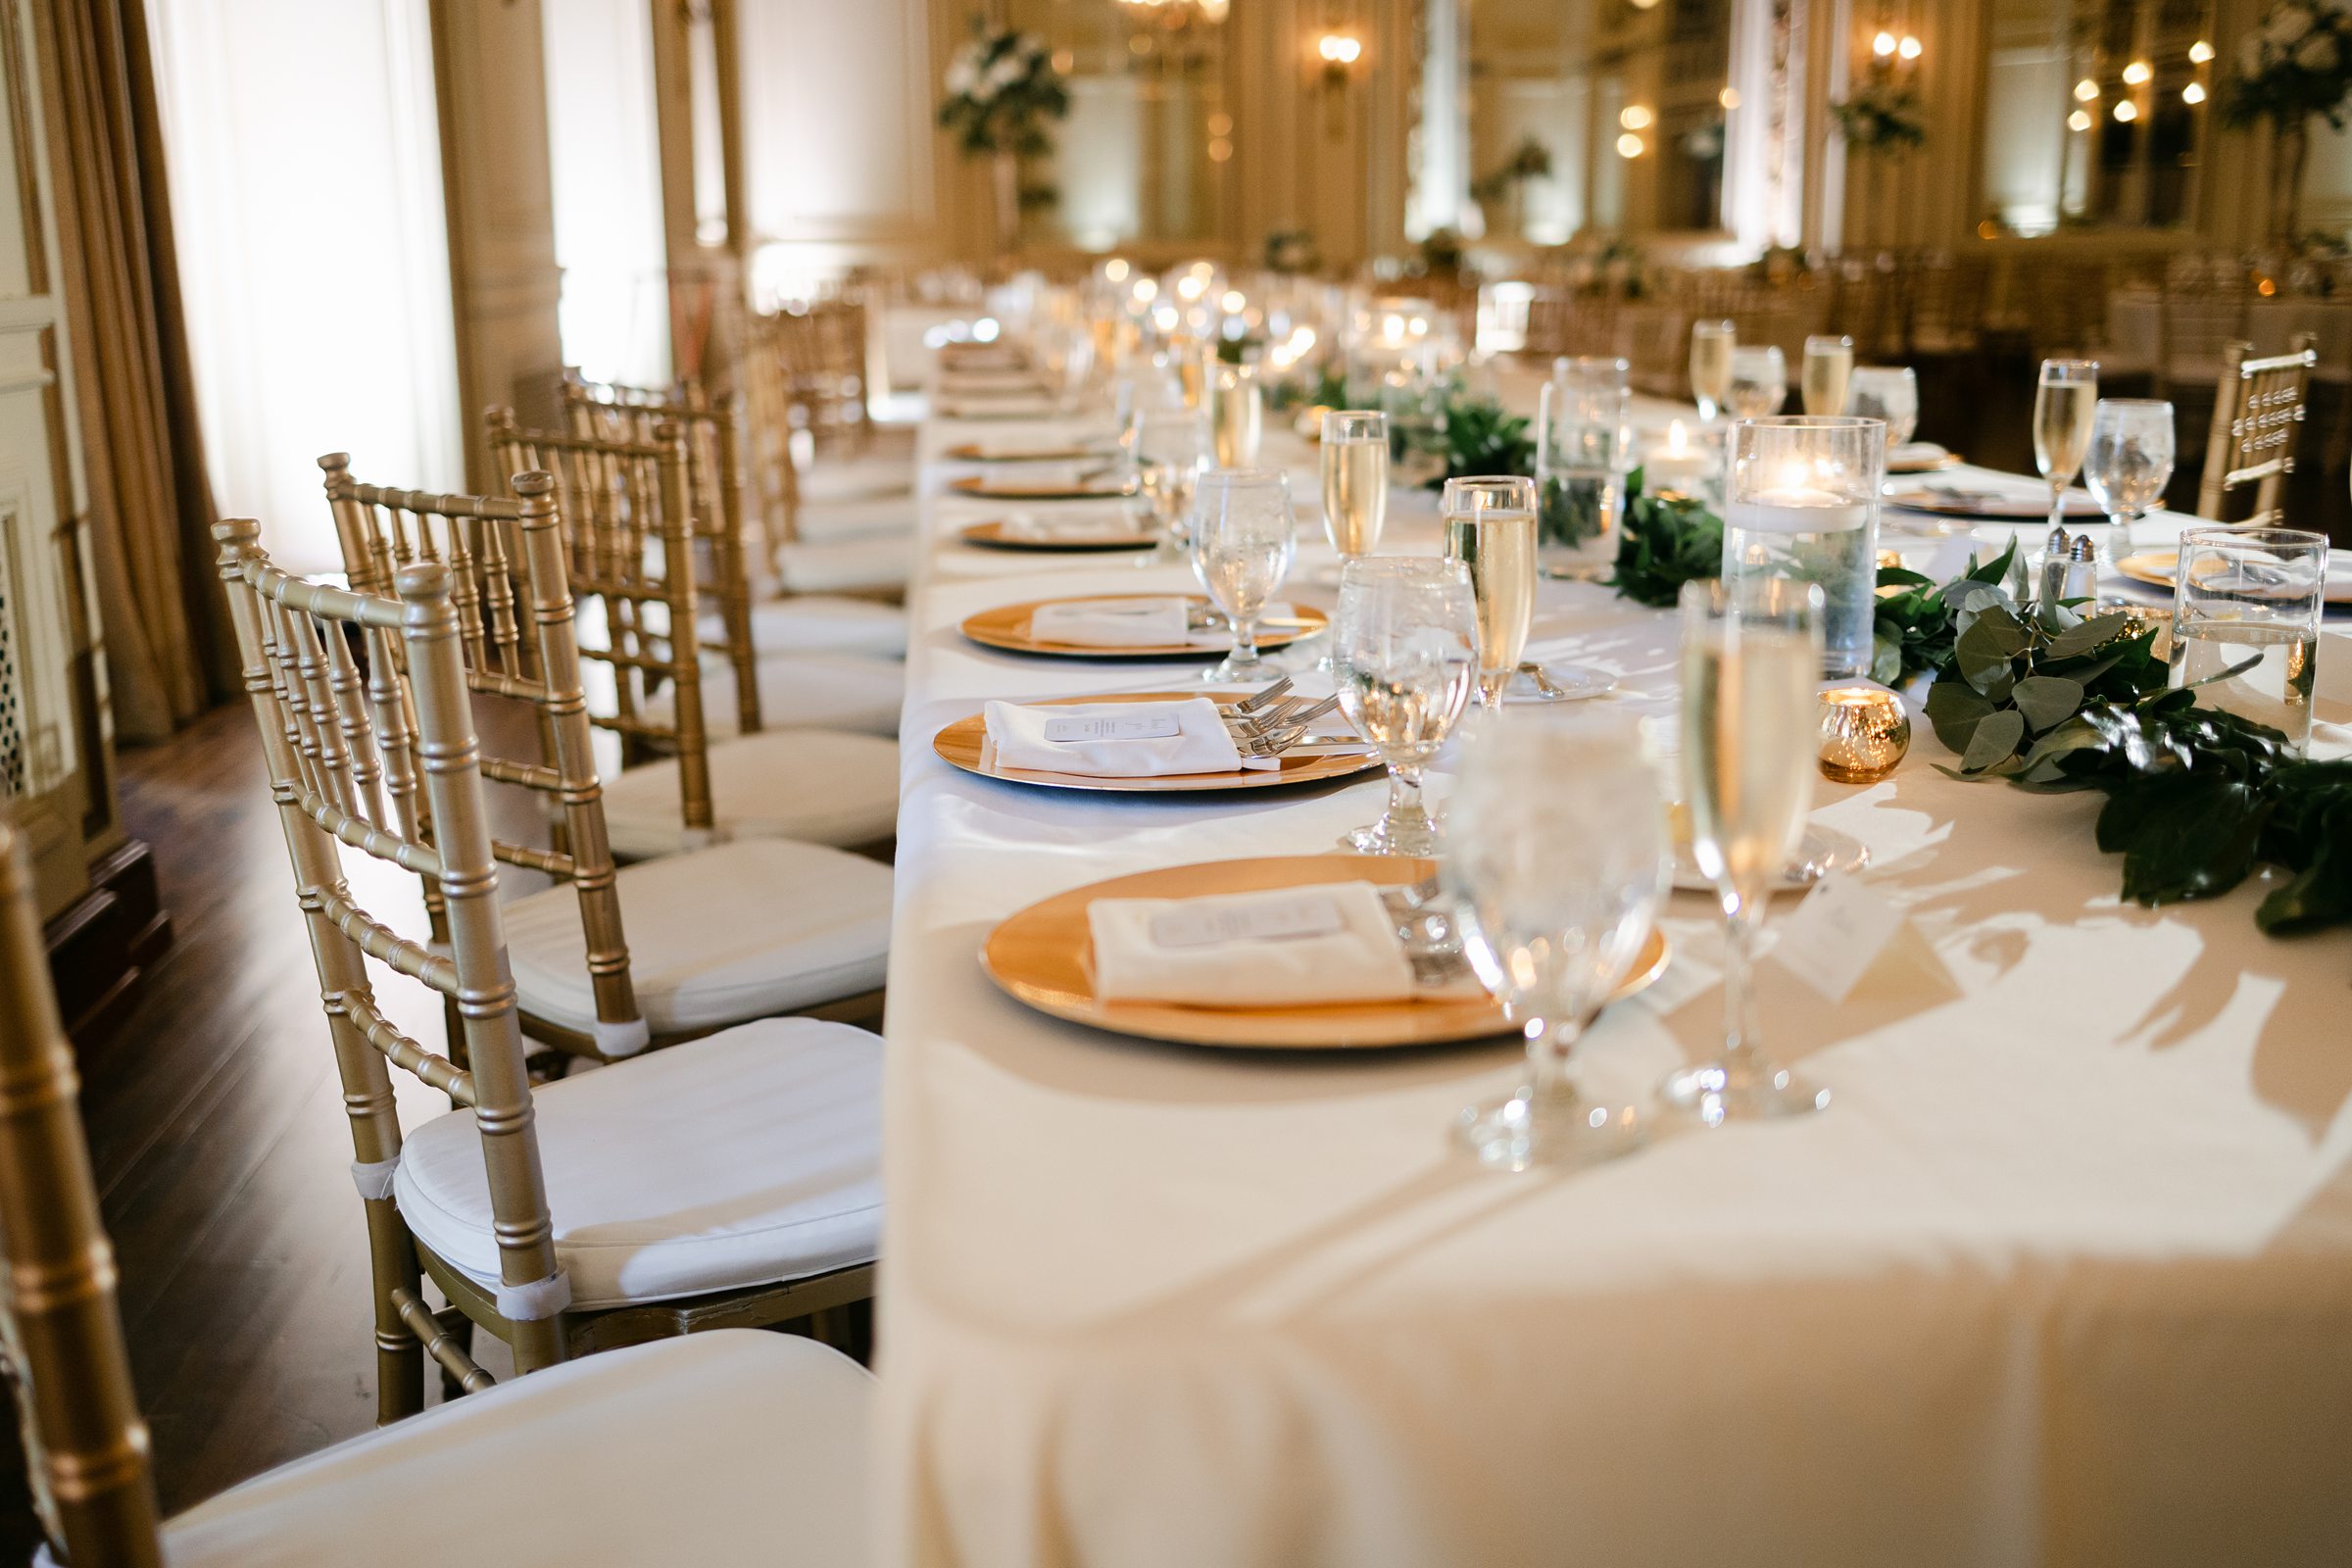 Head Table with white and gold table settings at indoor wedding reception